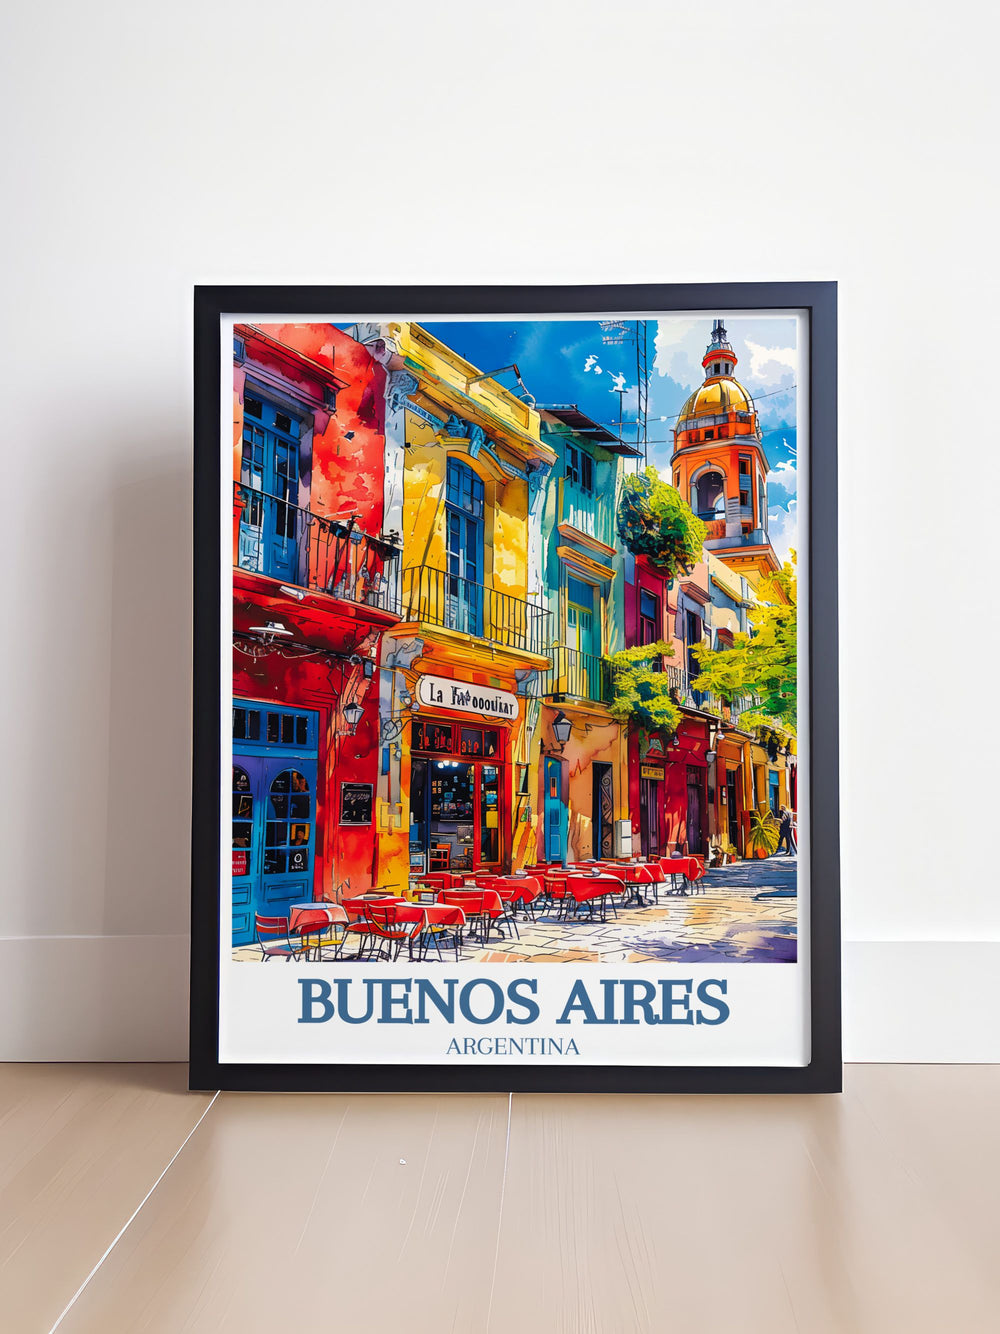 Featuring lush vistas of Buenos Aires and the iconic Caminito street, this poster is perfect for those who wish to bring a piece of Argentinas natural beauty and architectural grandeur into their home.